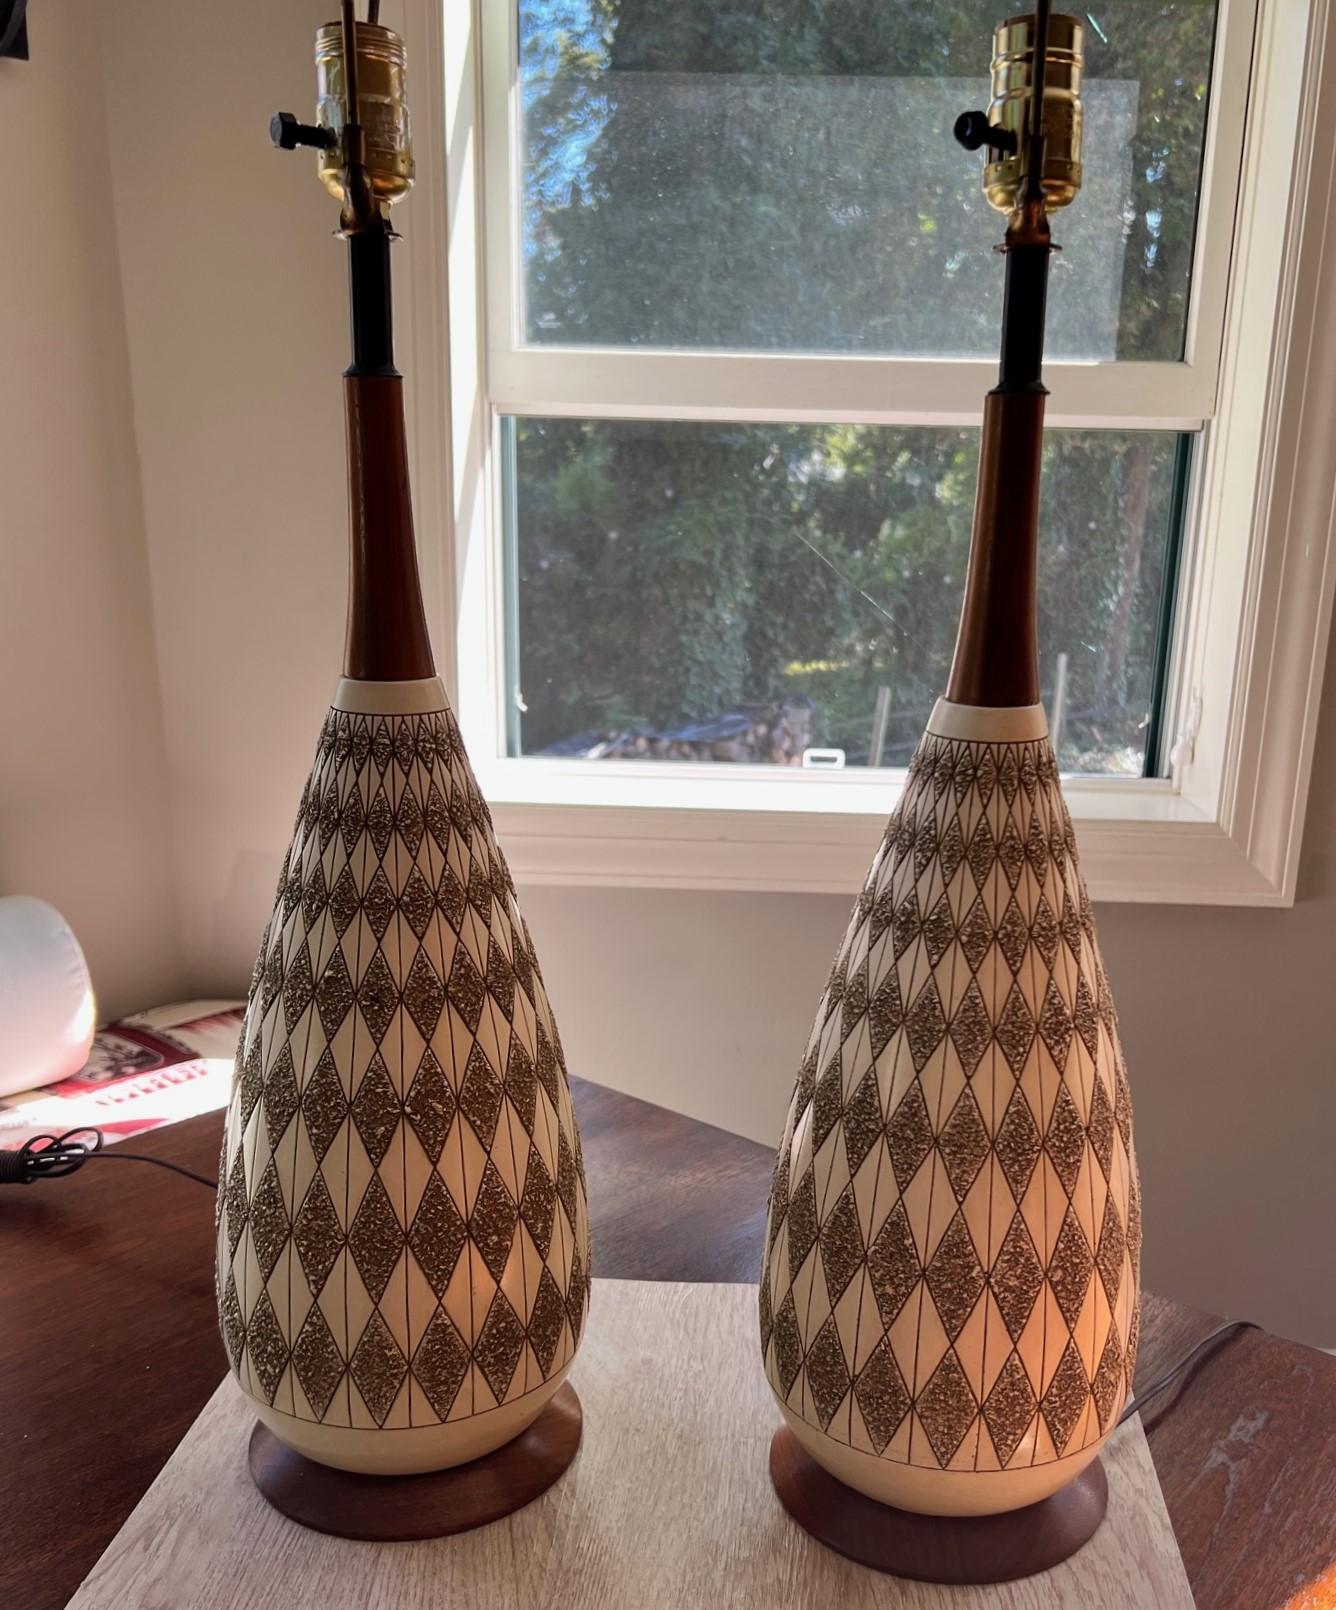 A pair of Quartite Creative Corp. mid century modern table lamps in ceramic with teak accents. The lamp body is decorated in a crisp tapering ivory and textured brown argyle pattern. 

These lamps have a timeless appeal. Drum shades would take them